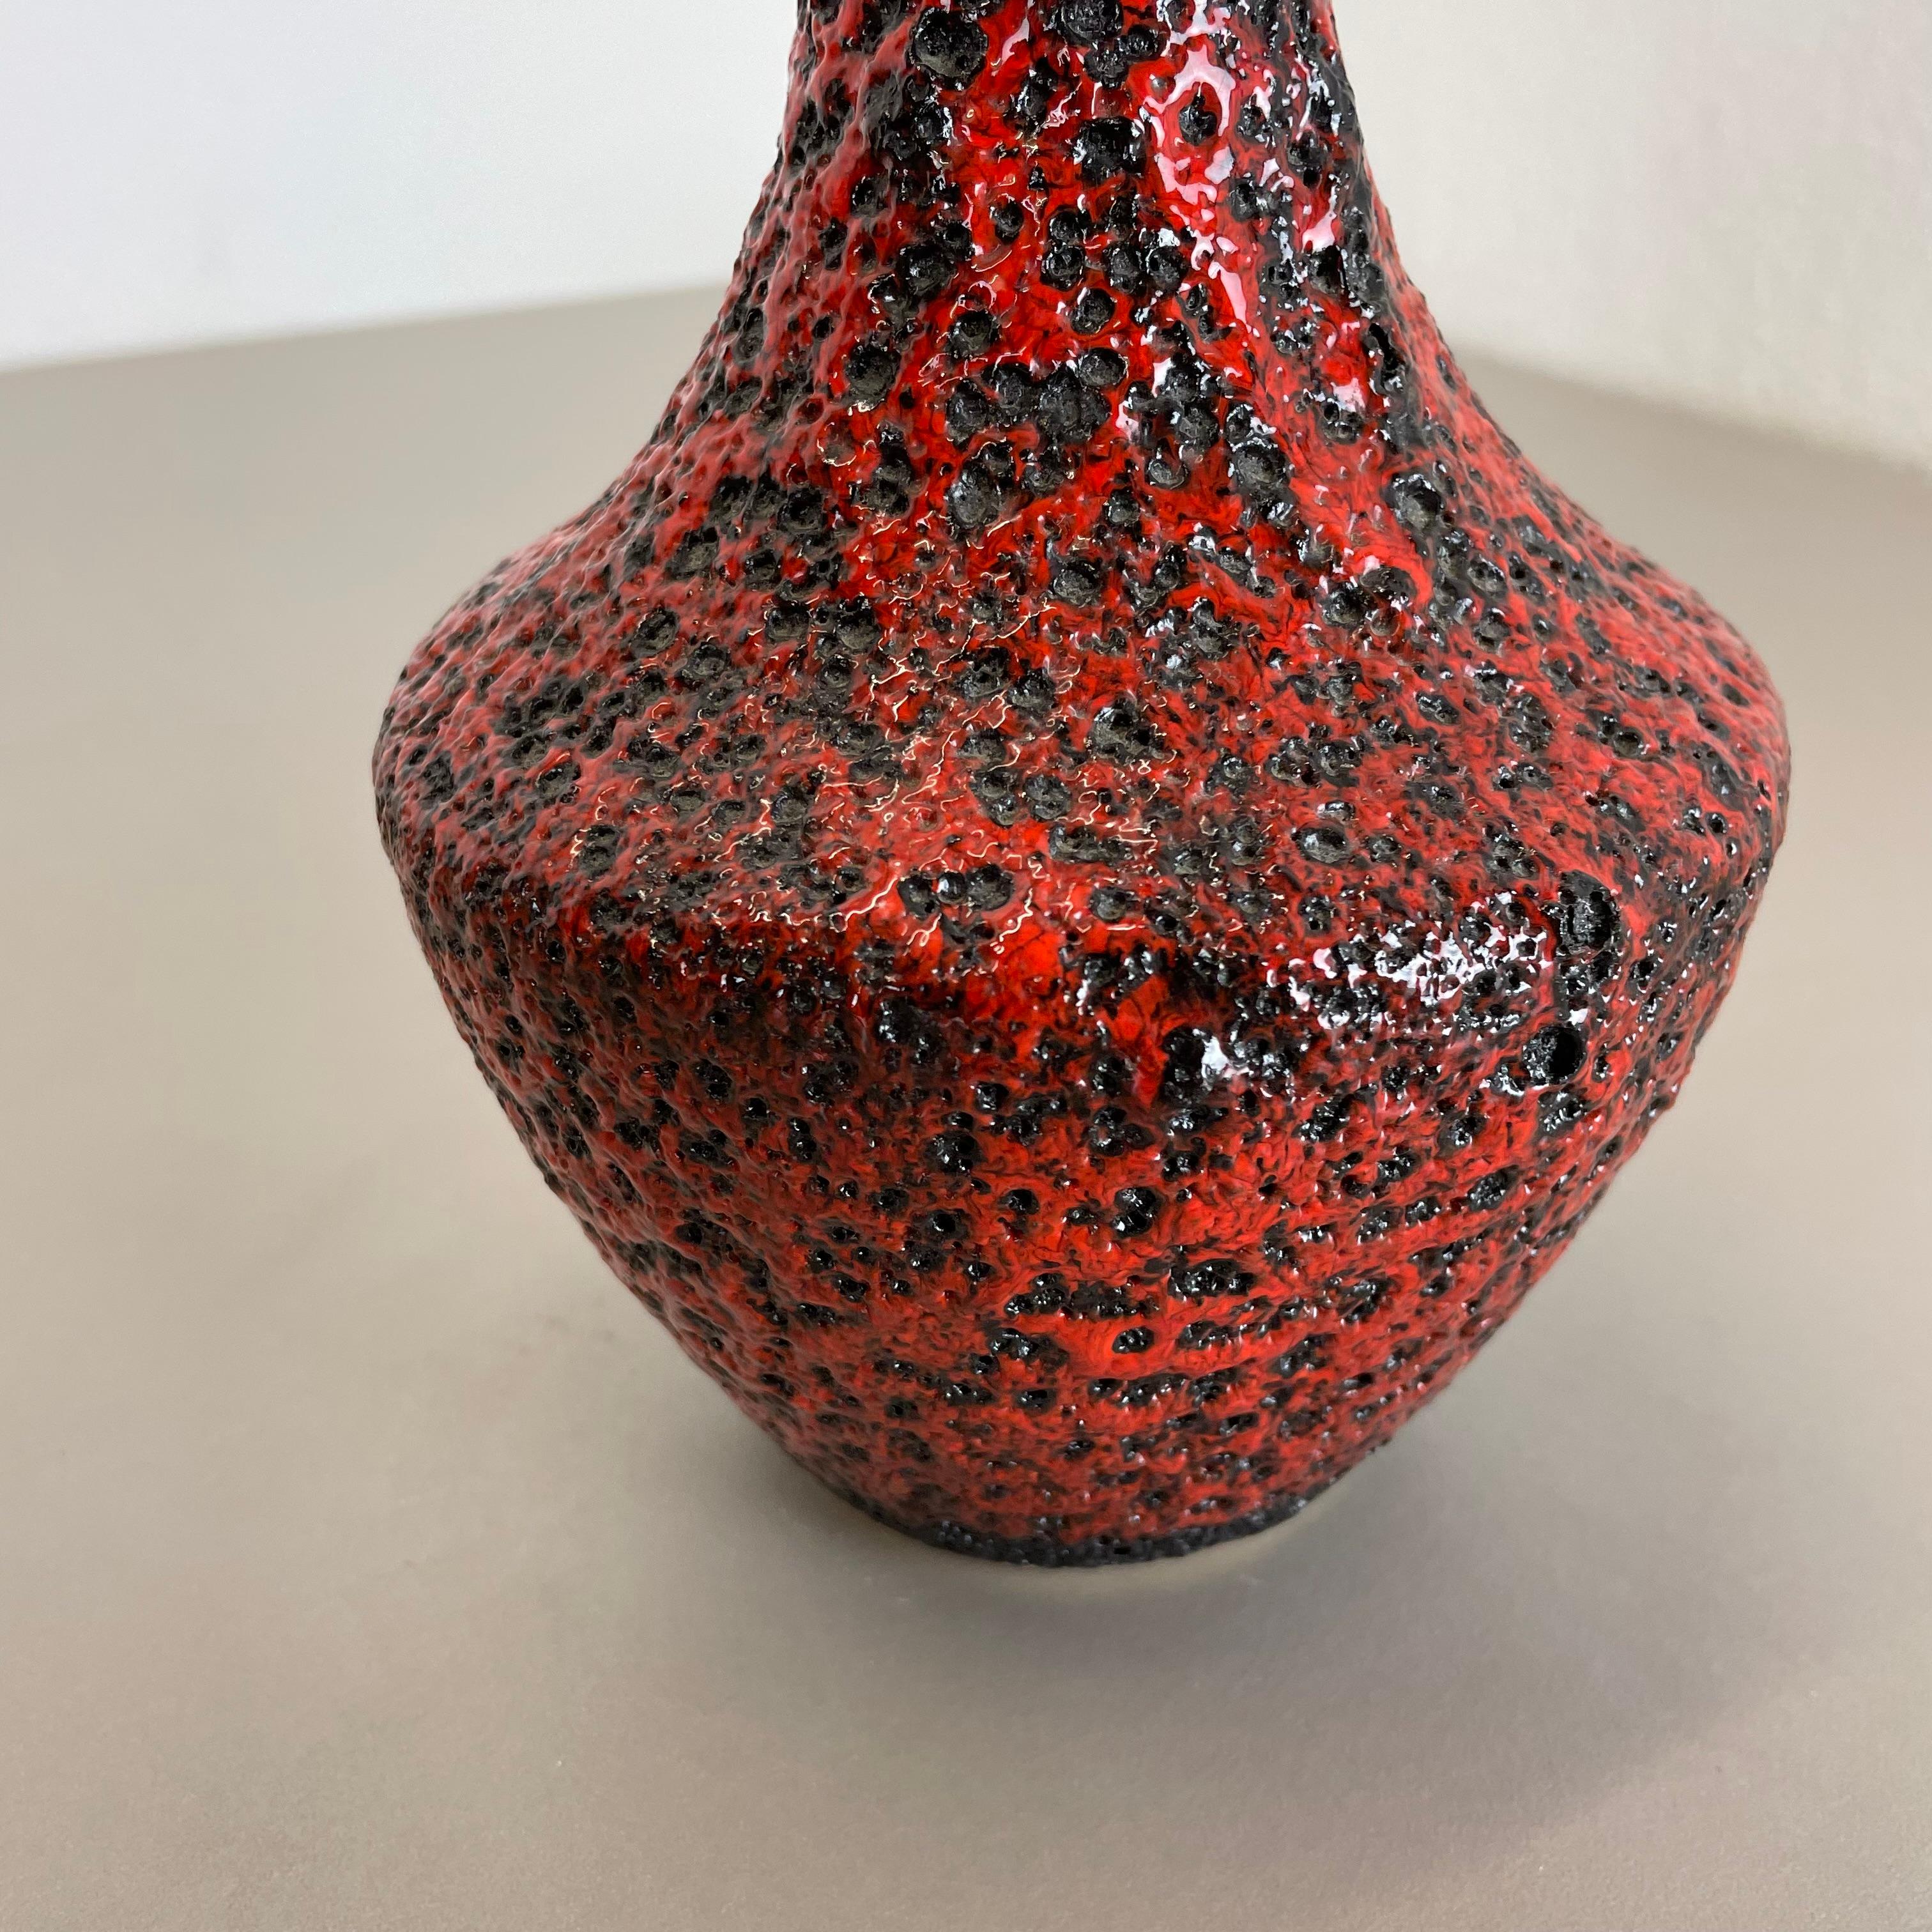 Brutalist Colorful Pottery red-black Vase Made by Silberdistel, W. Germany, 1970 For Sale 2